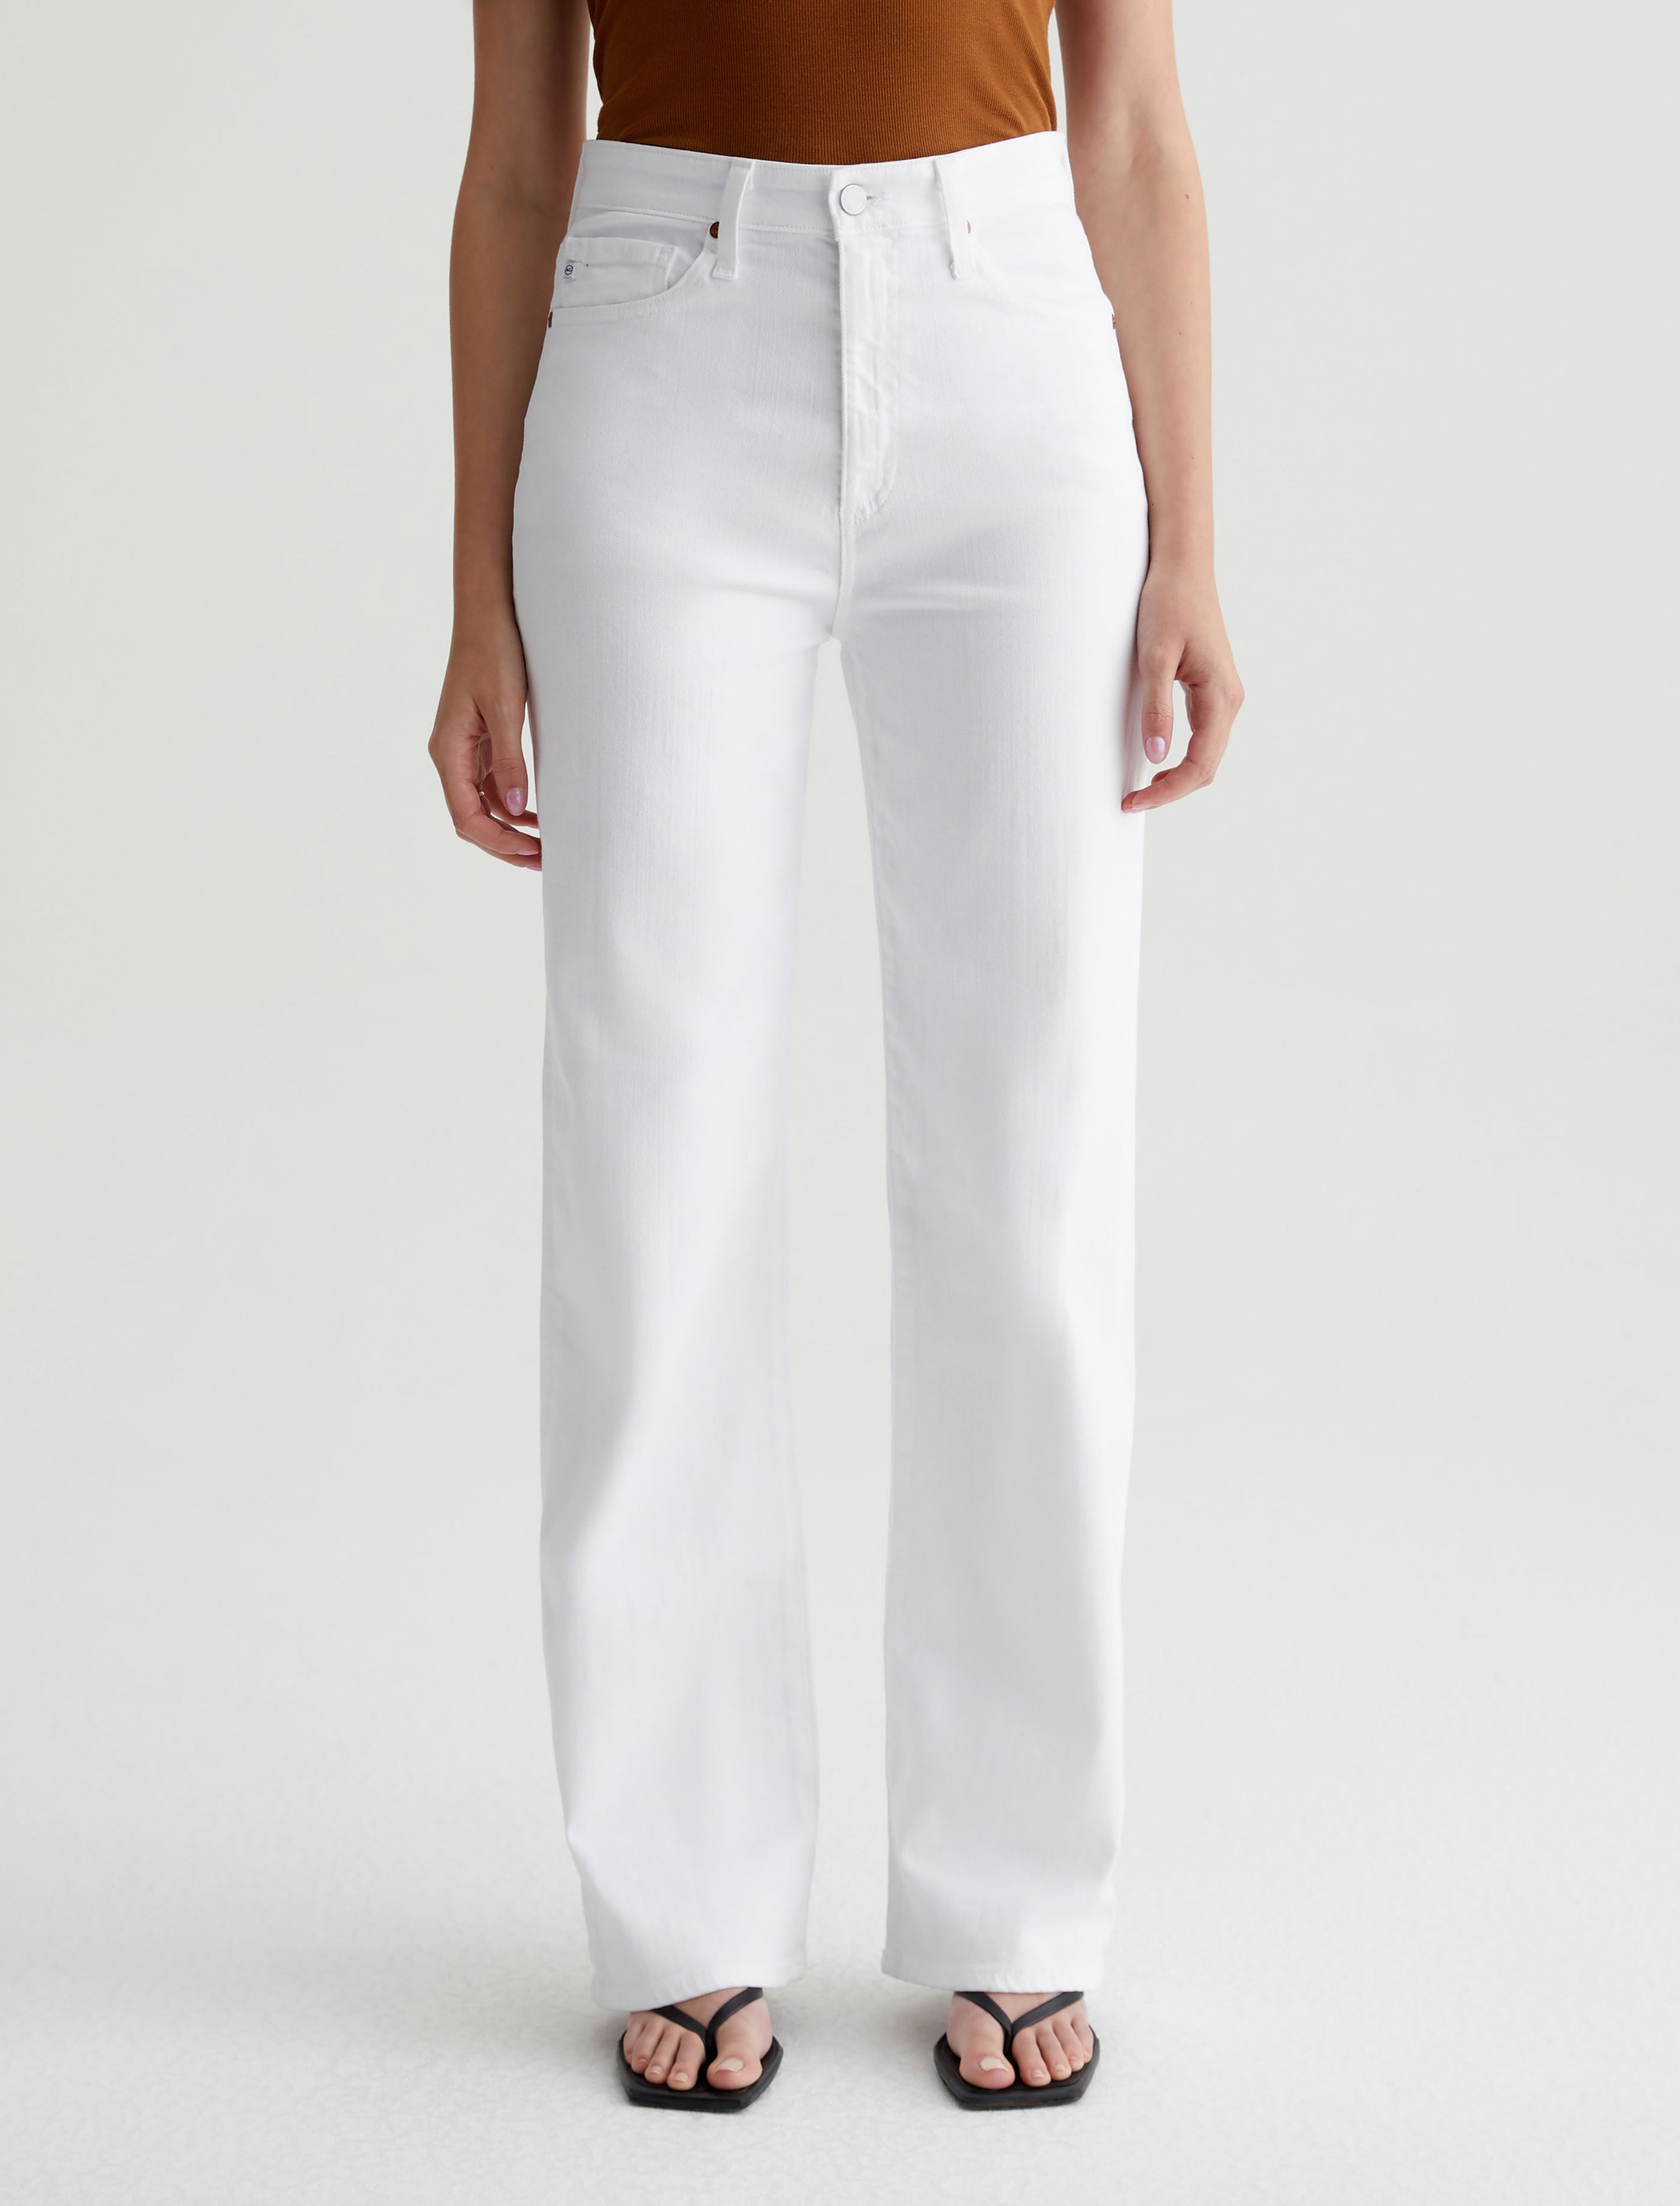 Q-Rious Regular Fit Women White Trousers - Buy White Q-Rious Regular Fit Women  White Trousers Online at Best Prices in India | Flipkart.com